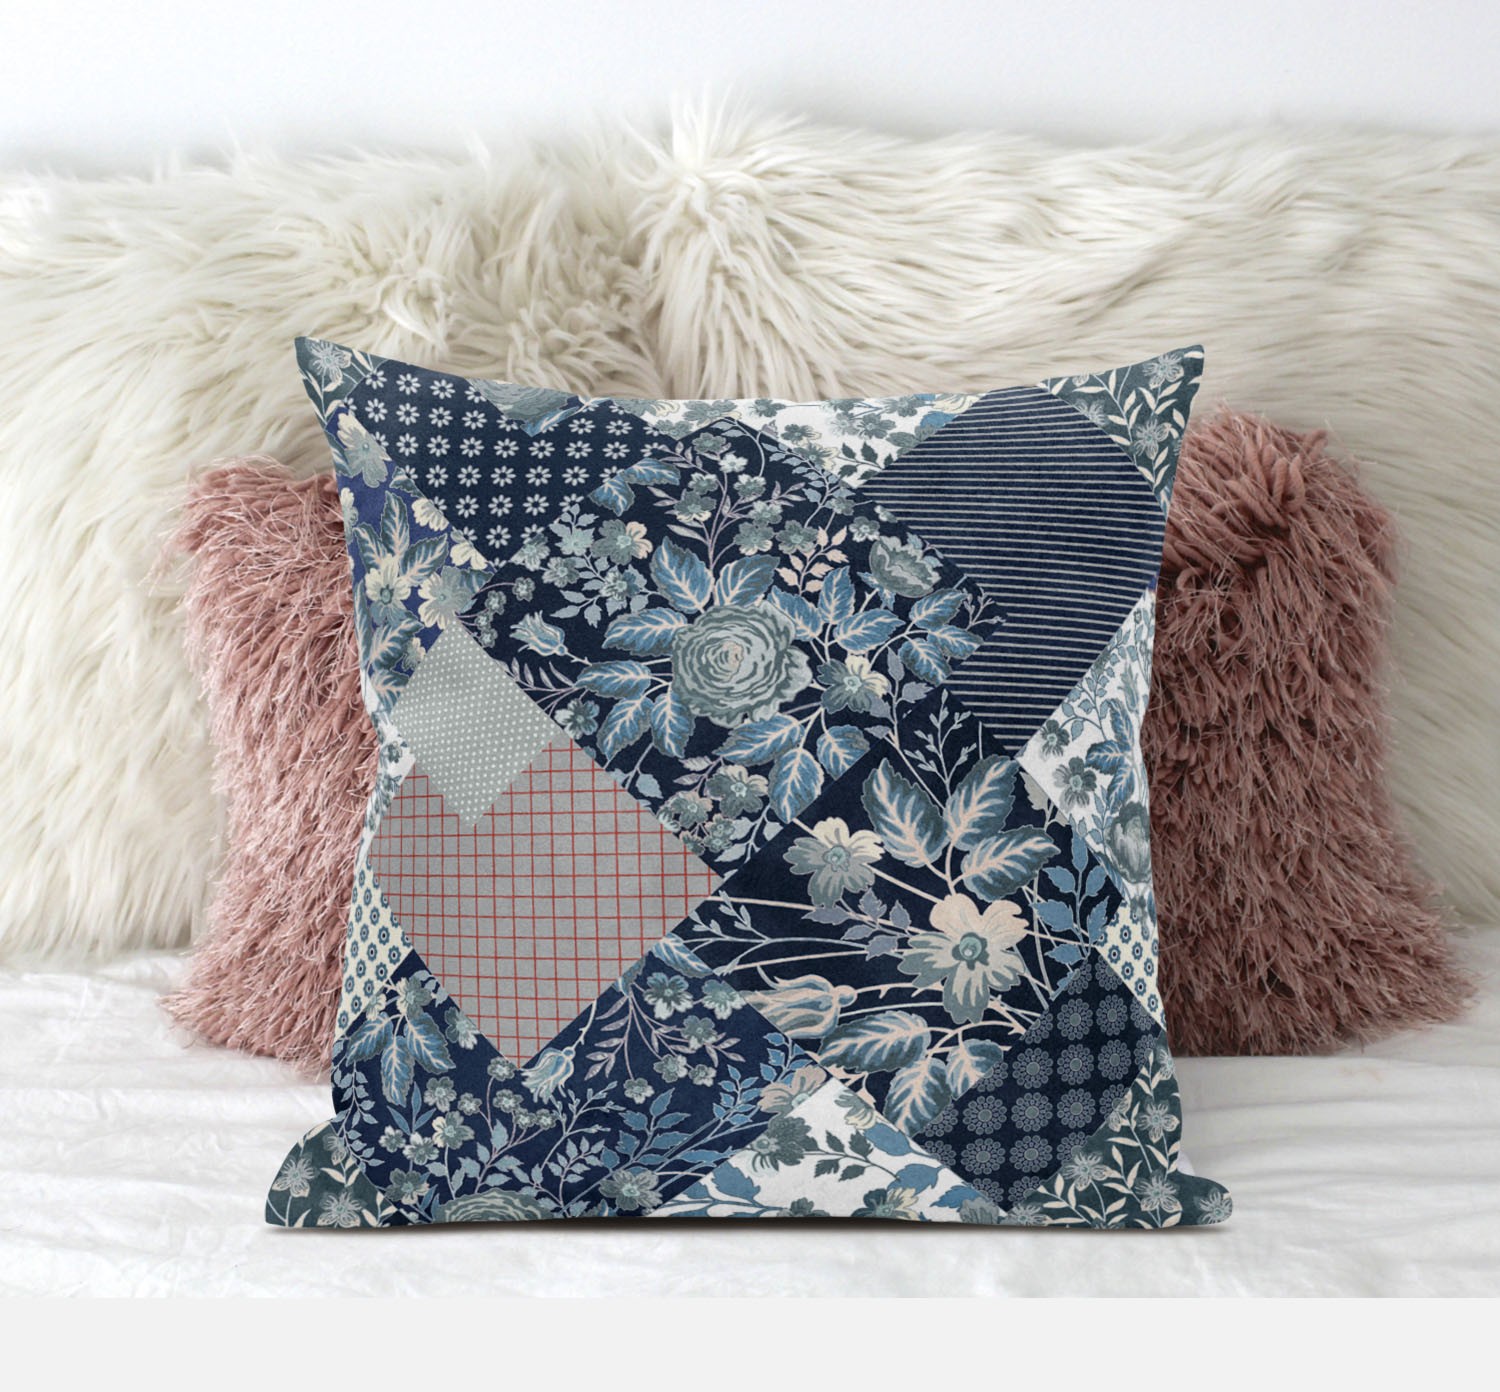 18" Deep Blue Gray Floral Suede Throw Pillow-411457-1